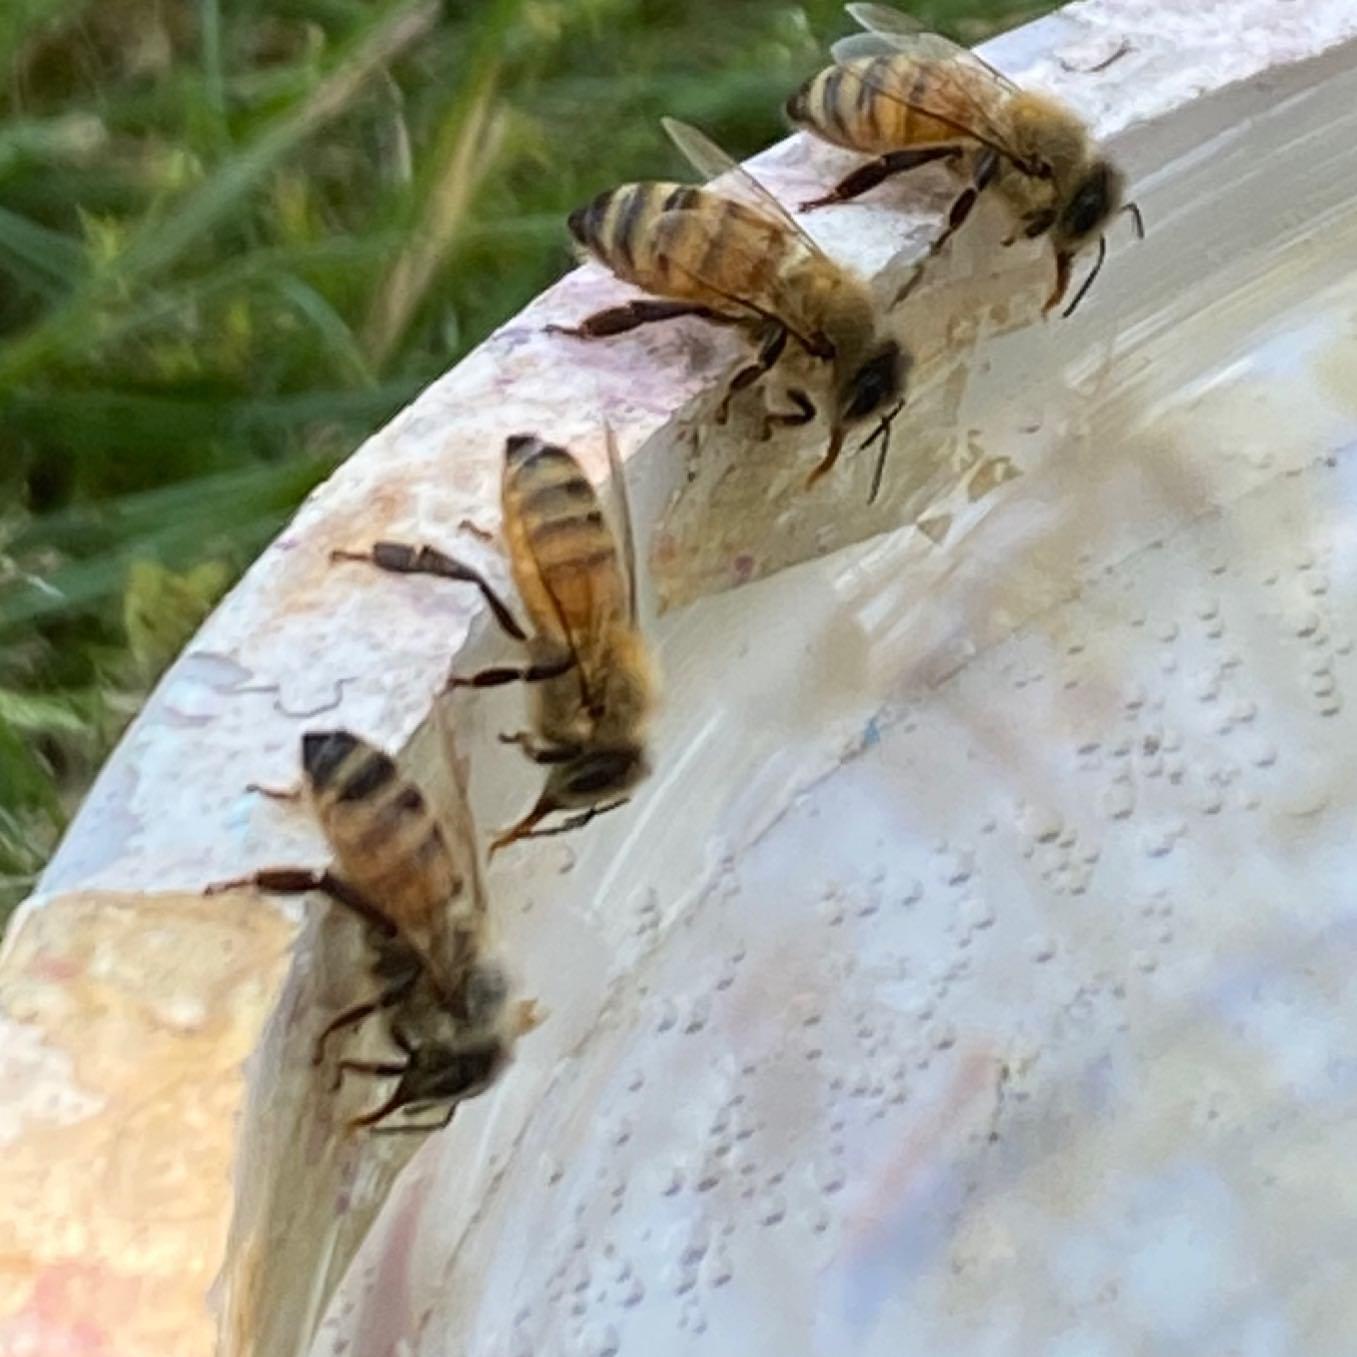 Four honey bee workers are shown on the edge of a shallow water bowl. Each has its tongue (proboscis) extended to collect water.